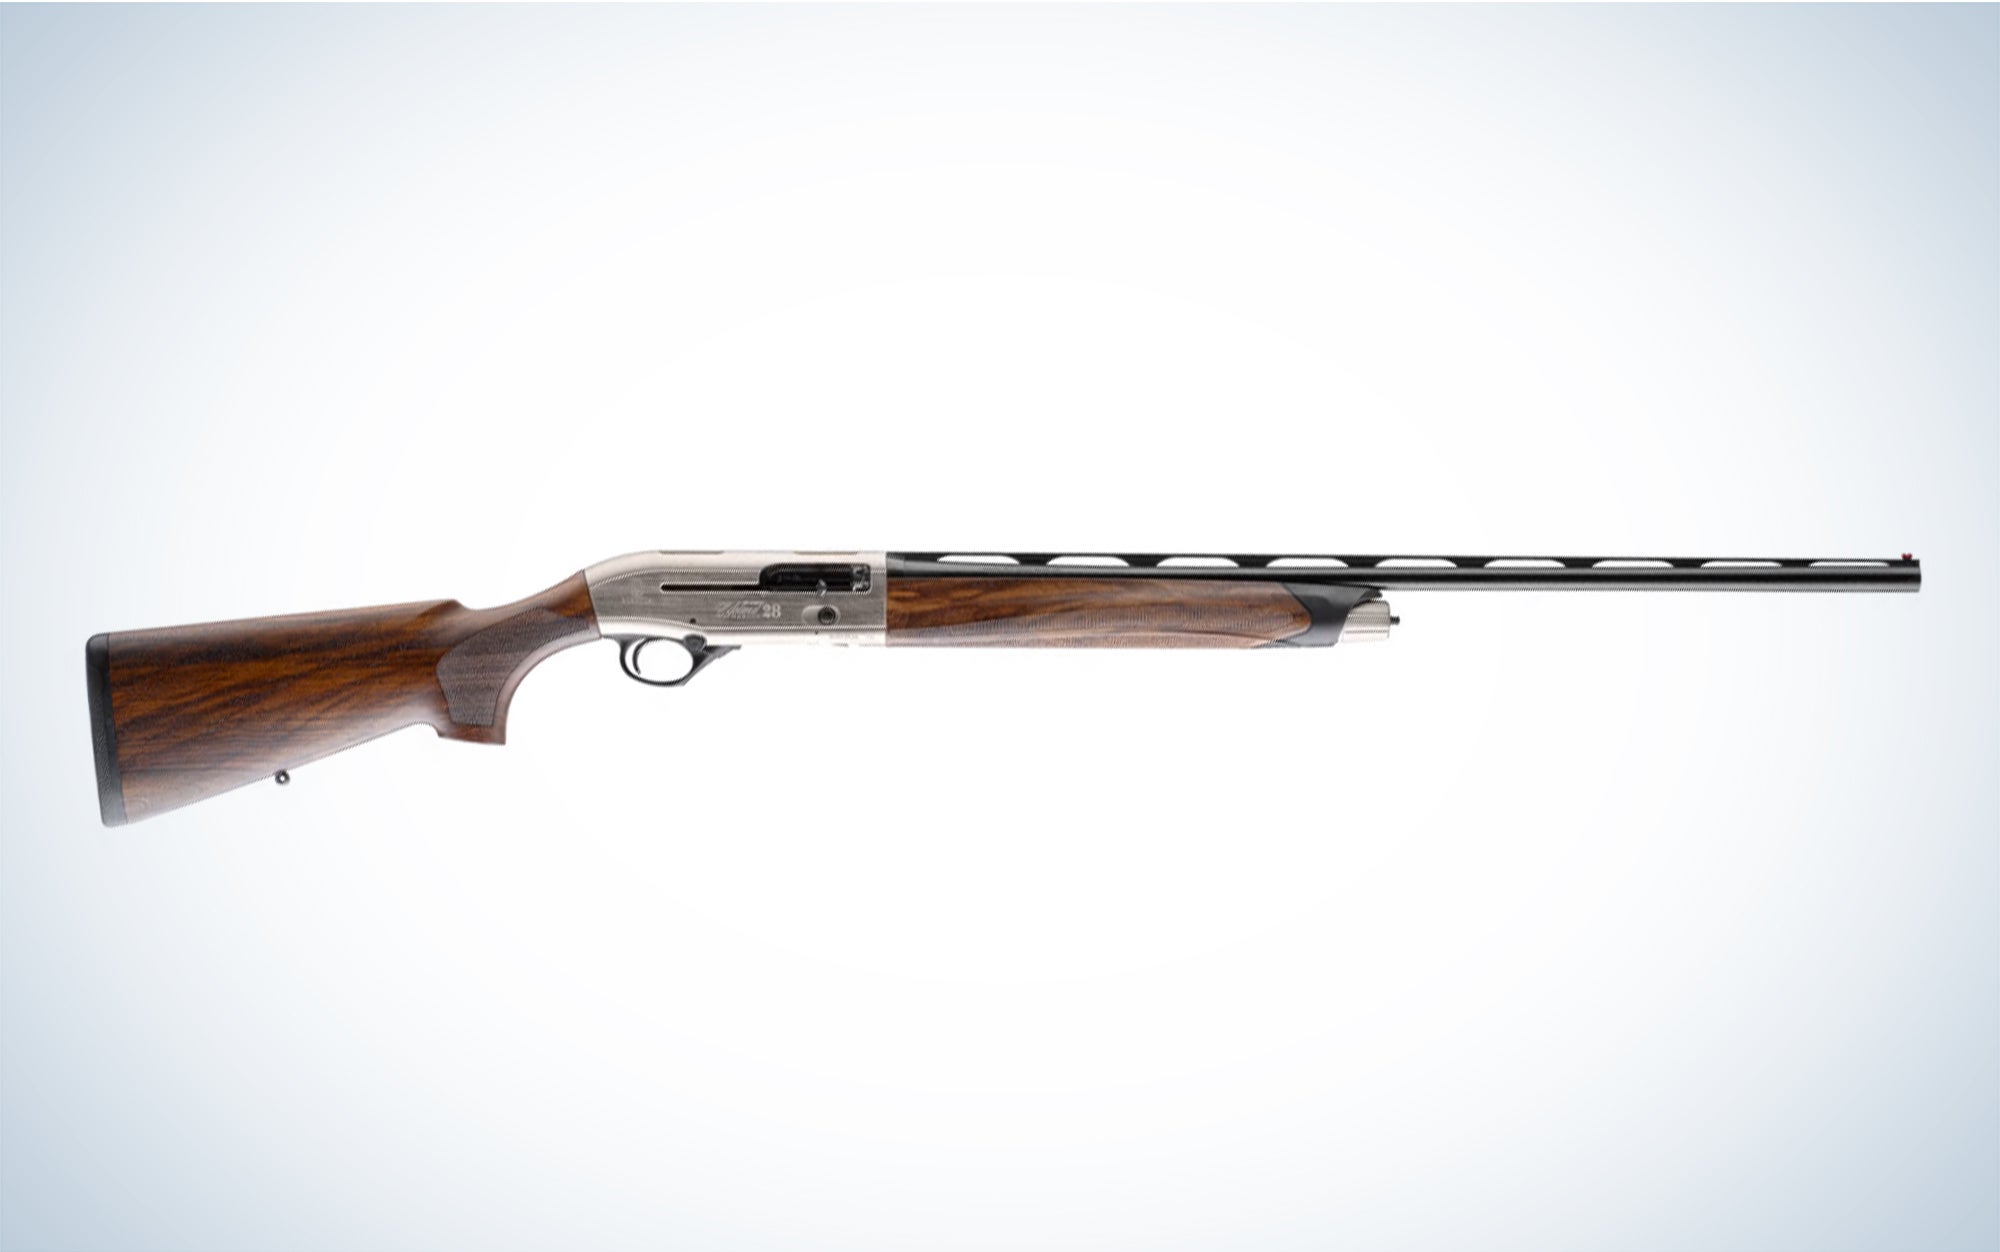 We tested the Beretta A400 Upland Magnum.